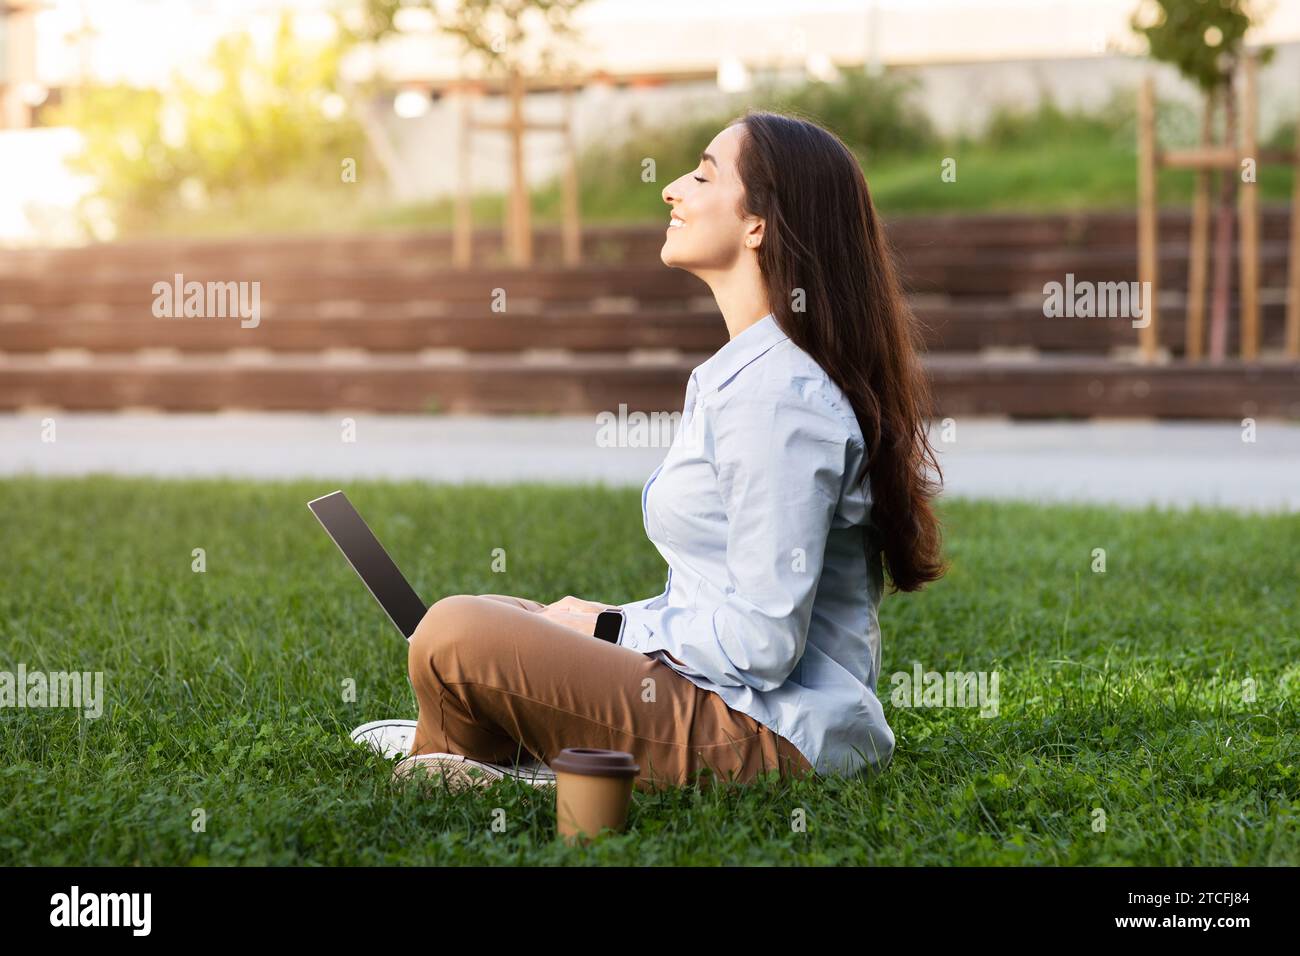 Positive serene professional european young woman sits with laptop in grassy outdoor area Stock Photo